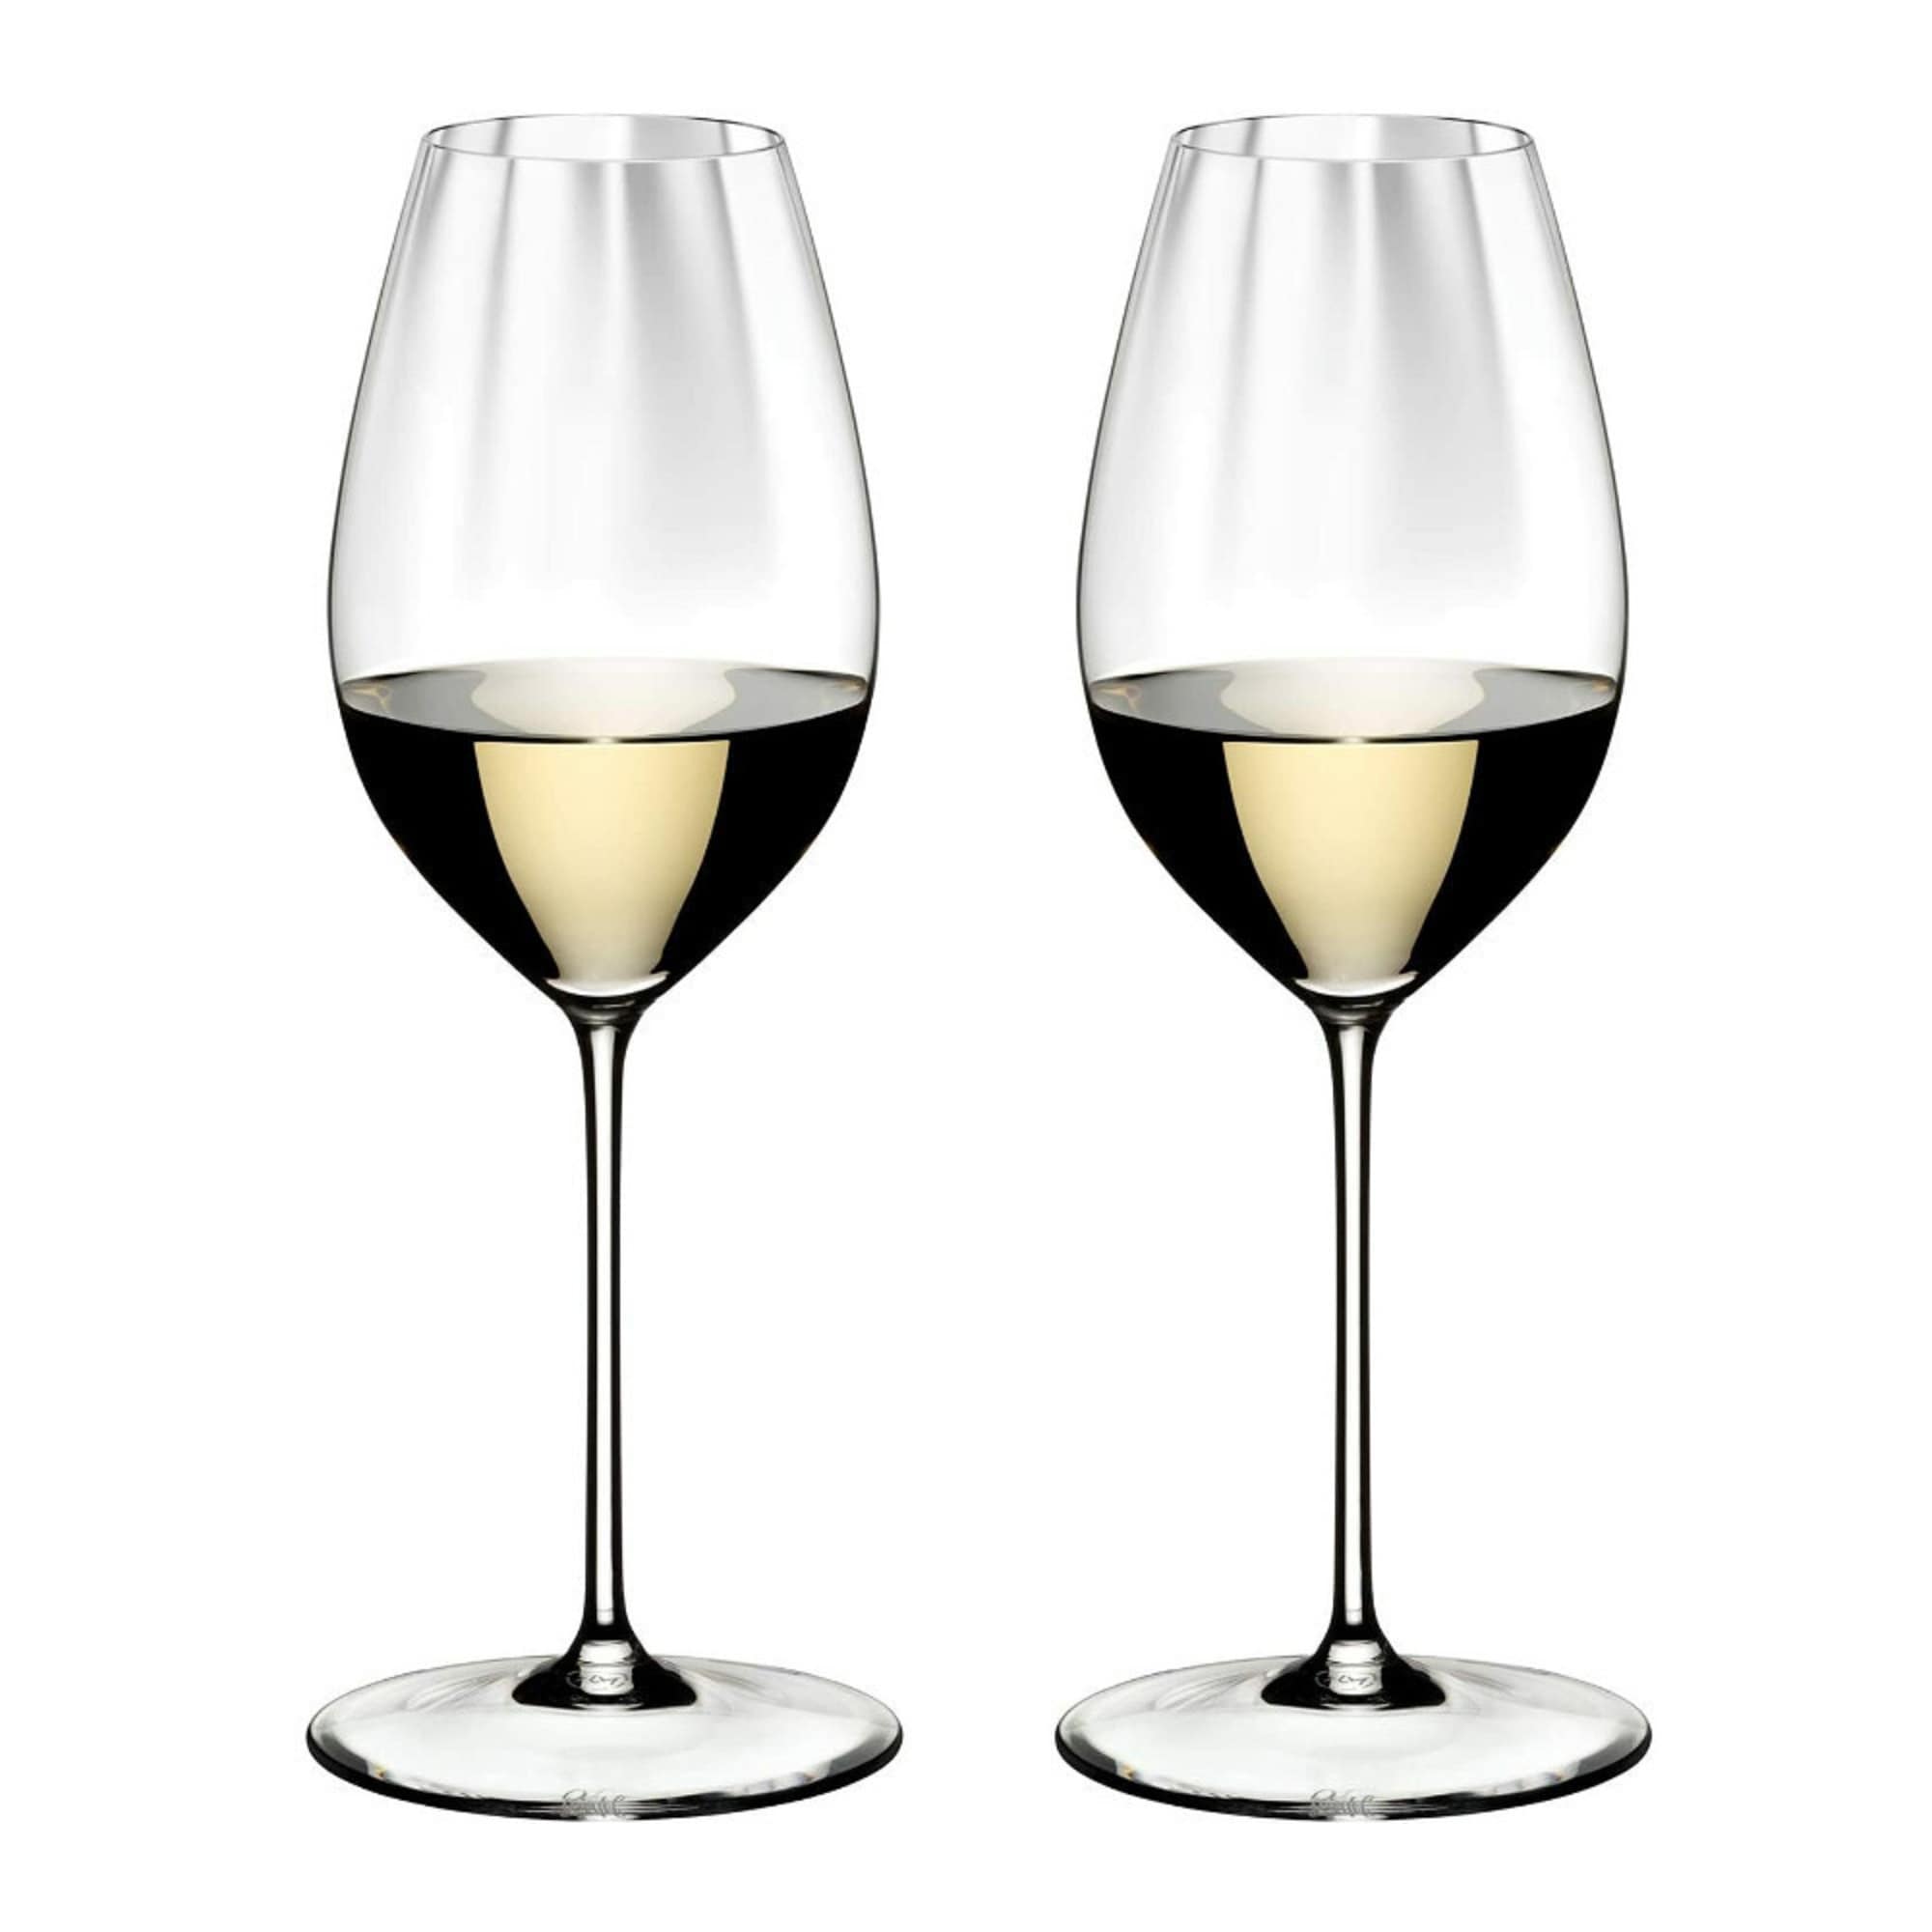 https://ak1.ostkcdn.com/images/products/is/images/direct/b3ae361856ccd9ccc39434049be08f050f3ed4a3/Riedel-Performance-Sauvignon-Blanc-Glass-%284Pk%29-with-Wine-Pourer-Bundle.jpg